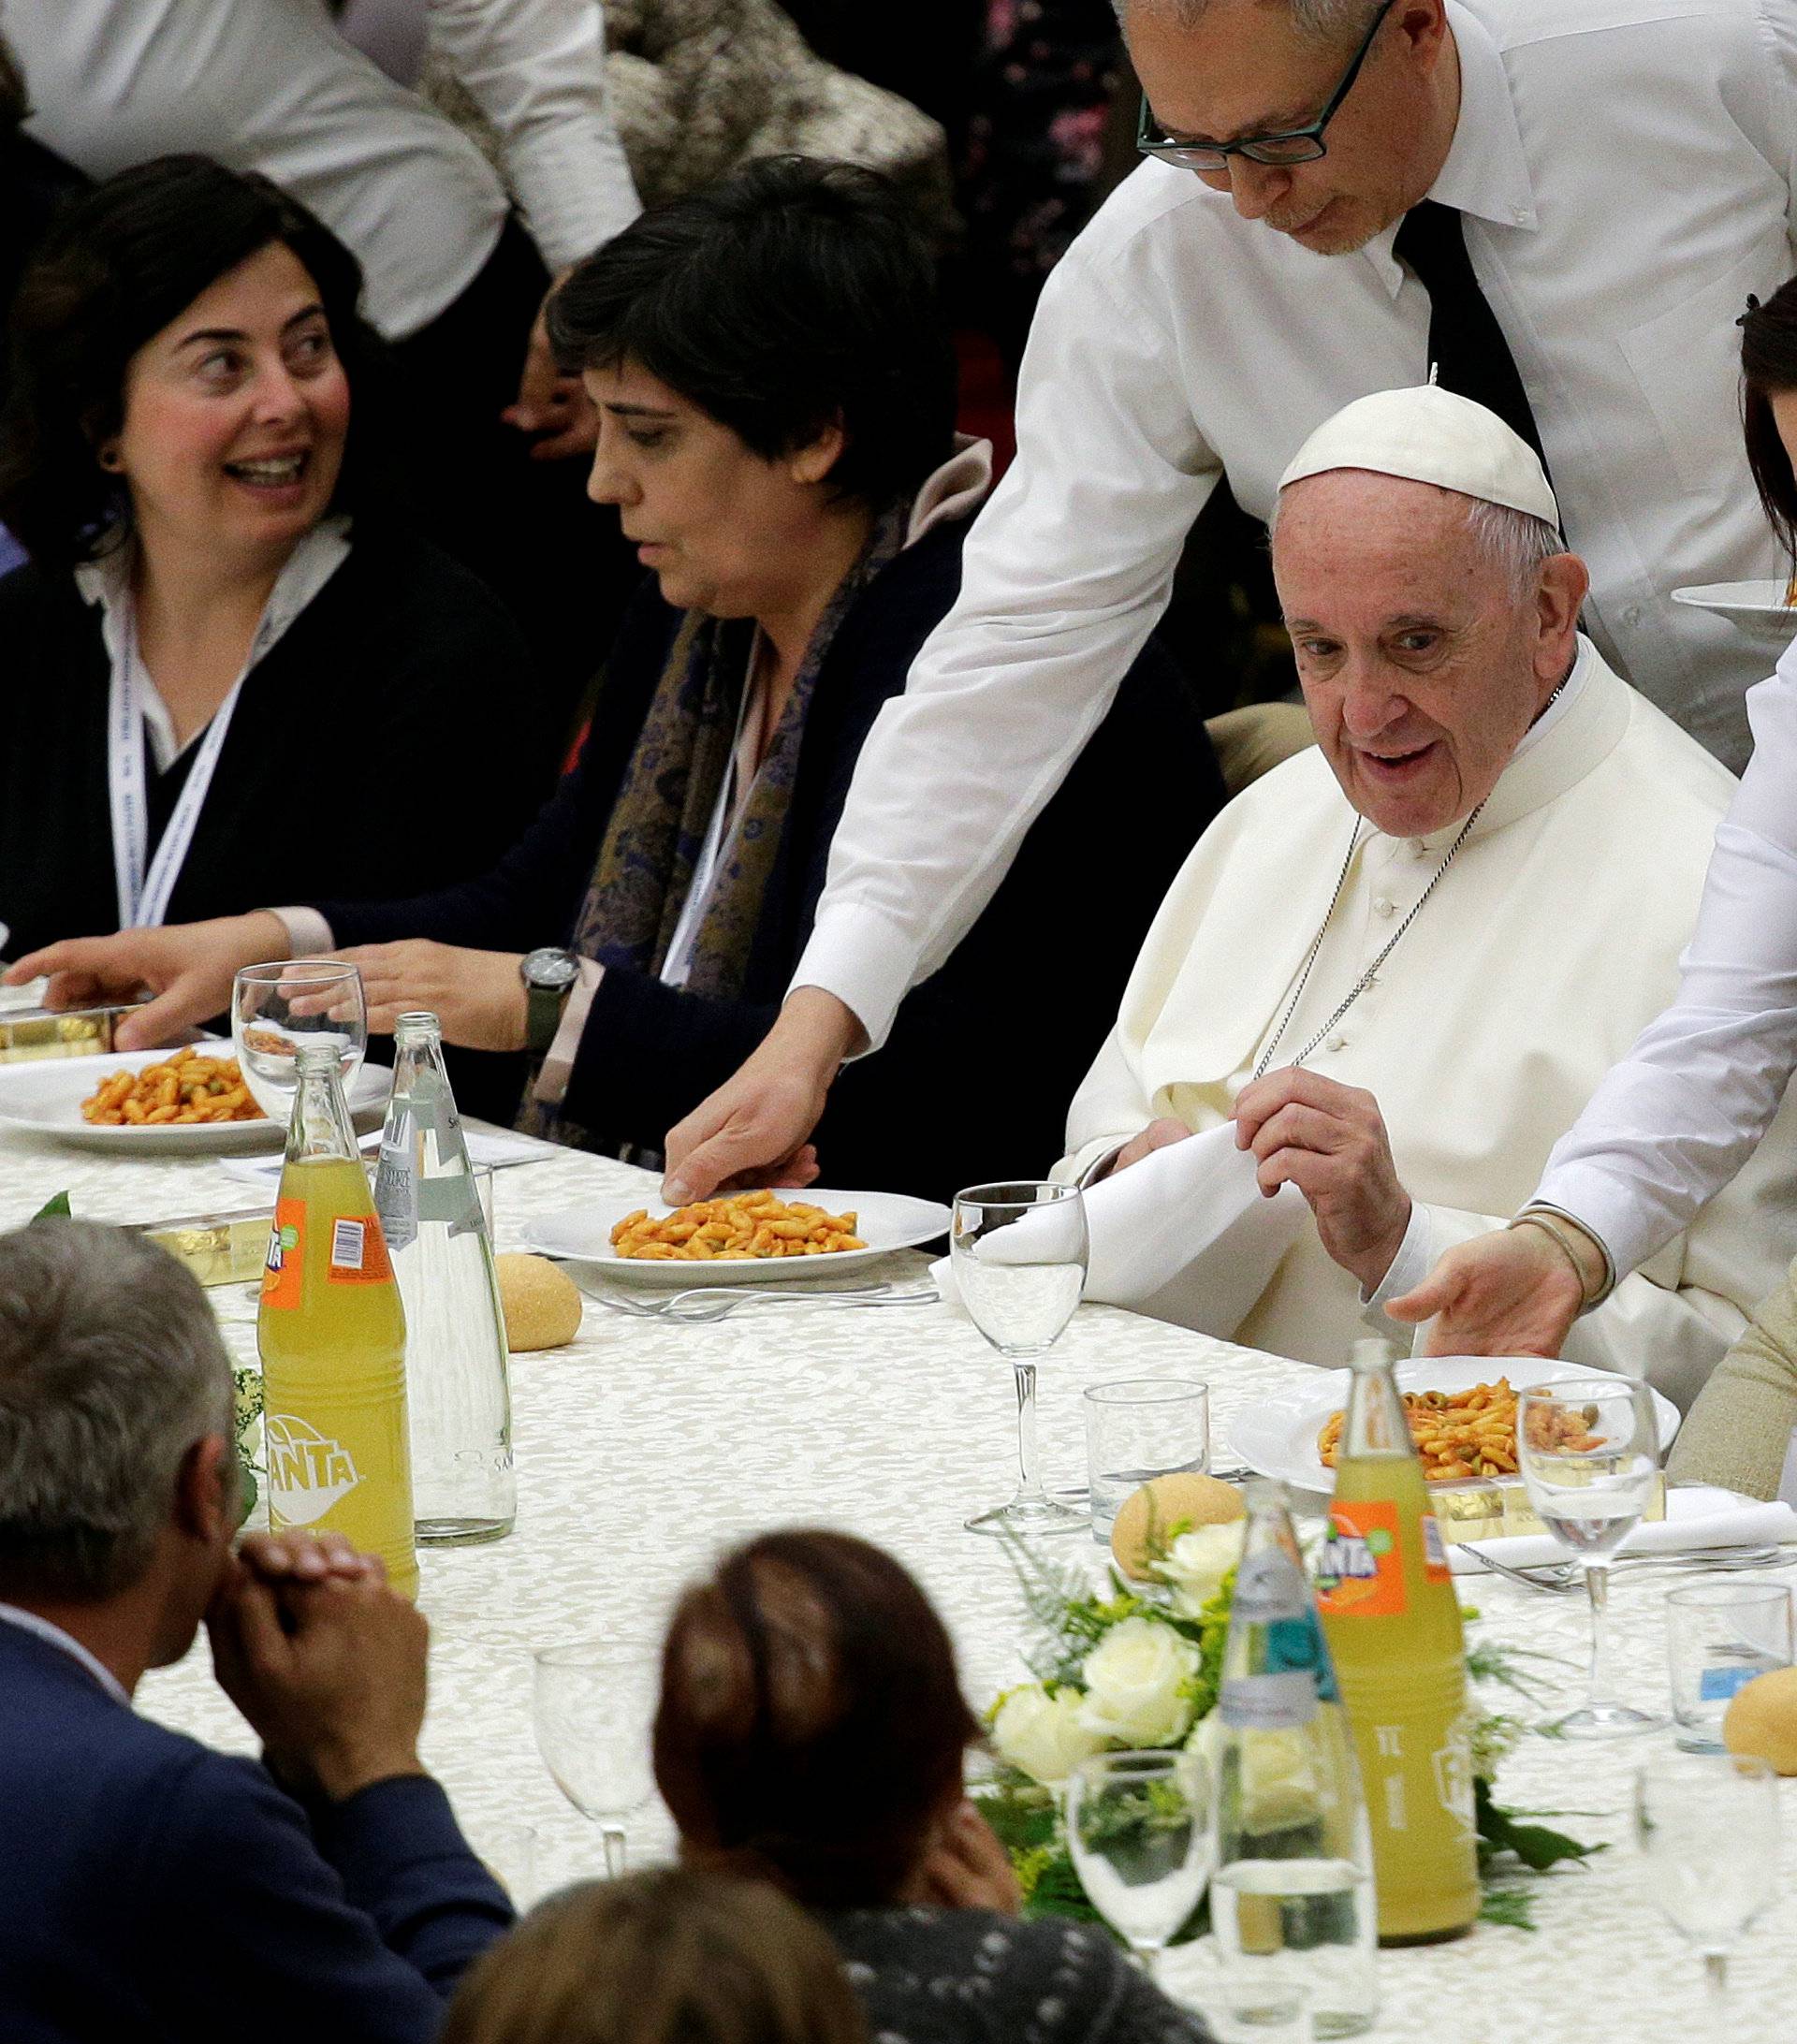 Pope Francis has lunch with the poor following a special mass to mark the new World Day of the Poor in Paul VI's hall at the Vatican